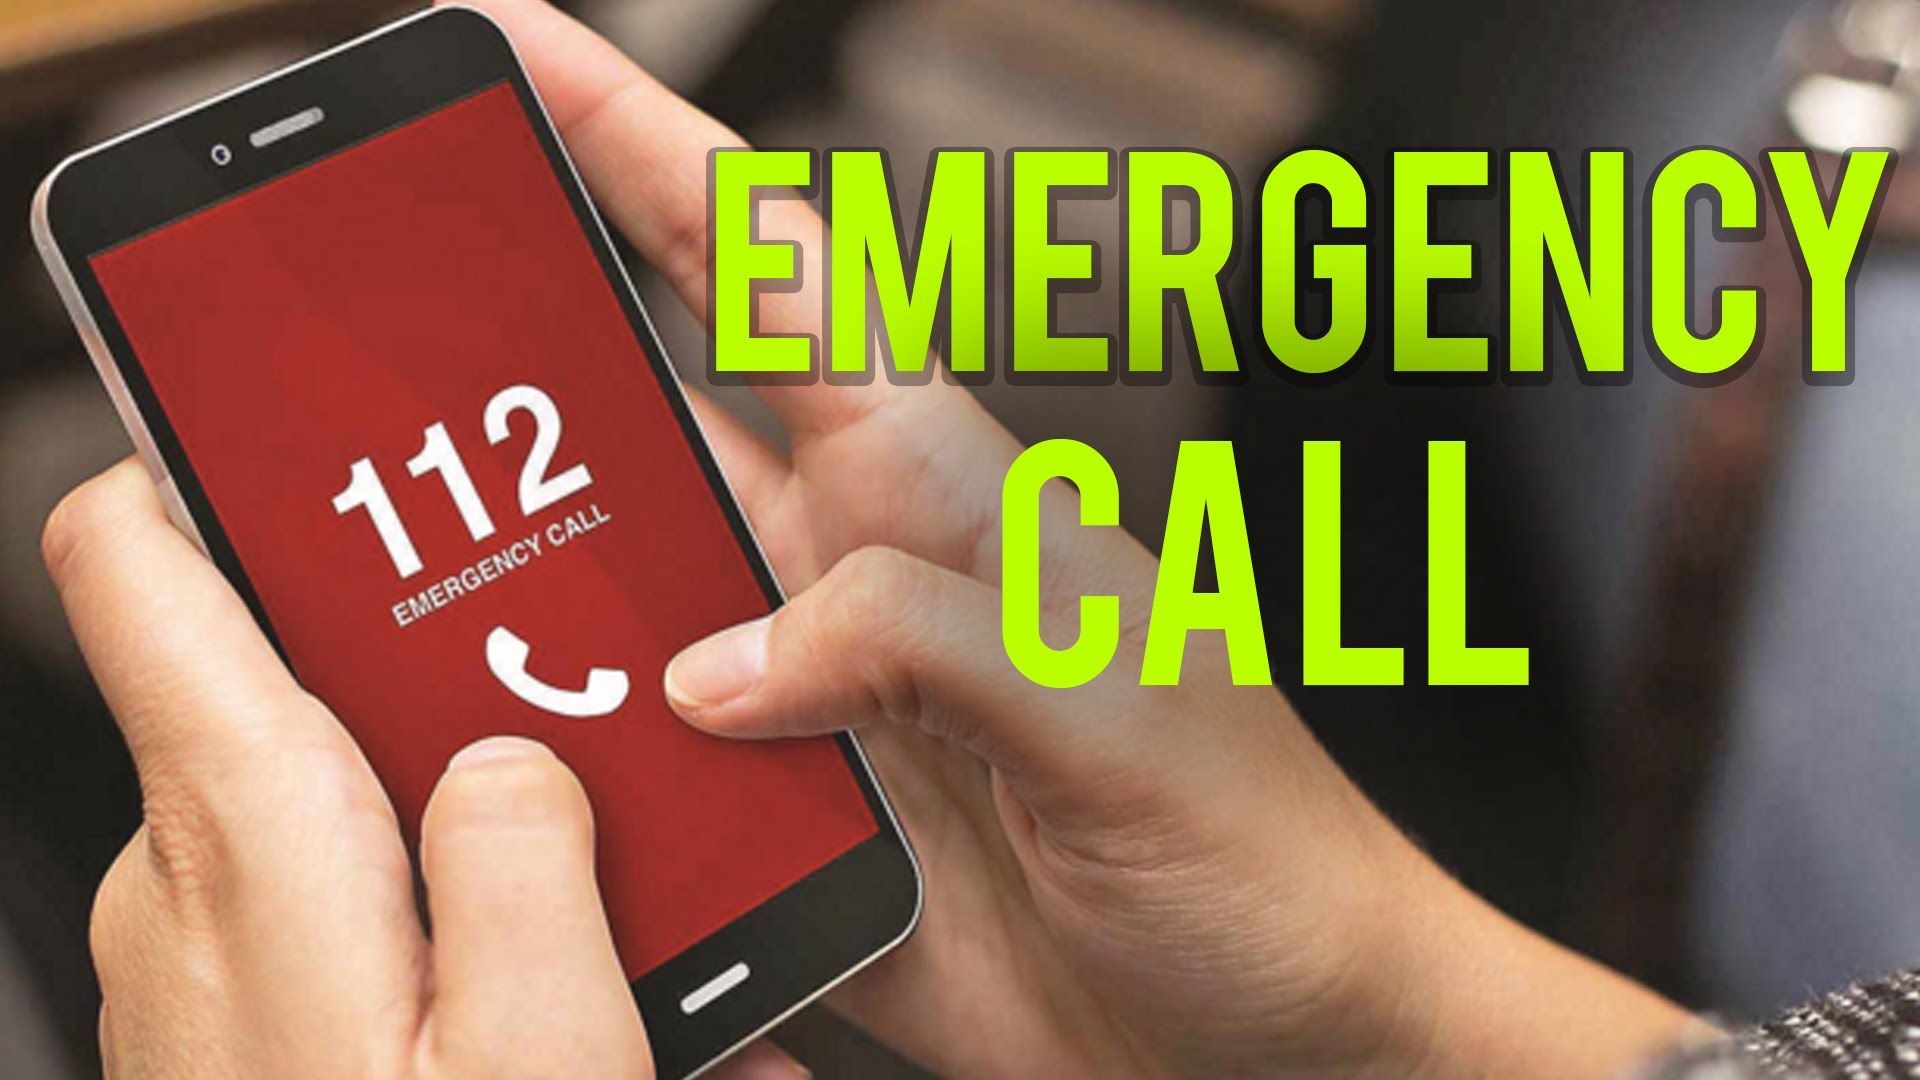 Earlier the Government had launched one emergency number that is 112